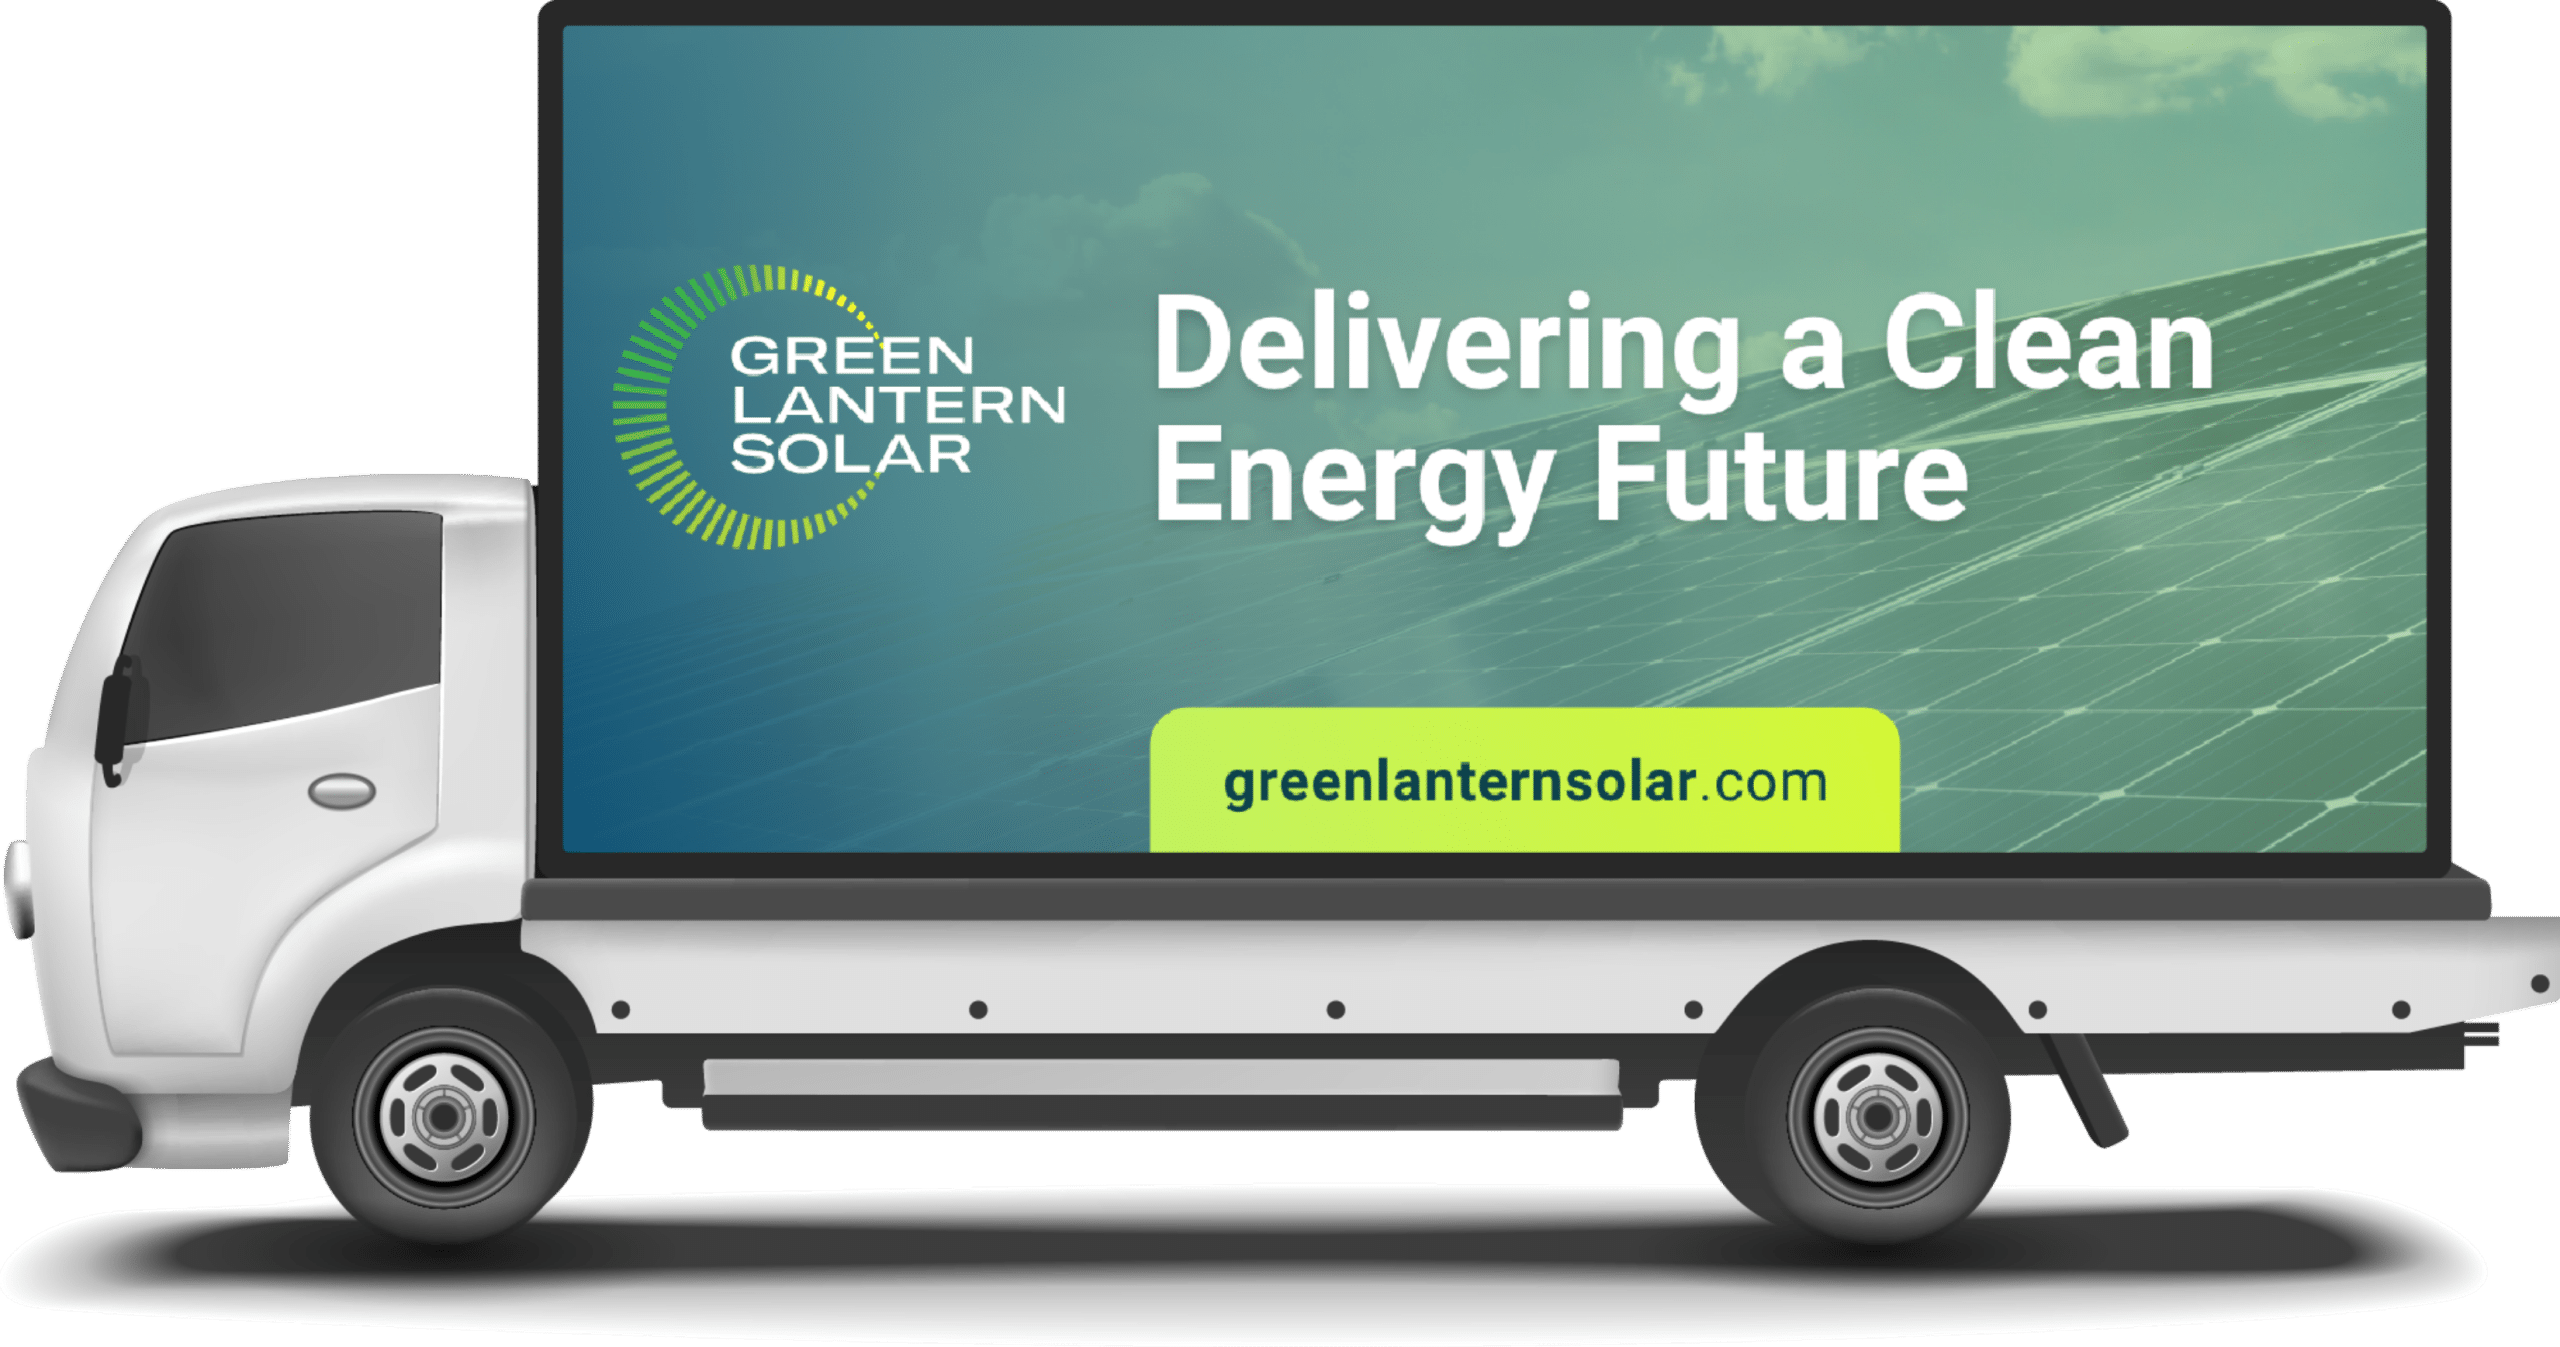 billboard advertisement showcasing the services and impact of green lantern solar (gls) in the renewable energy sector.